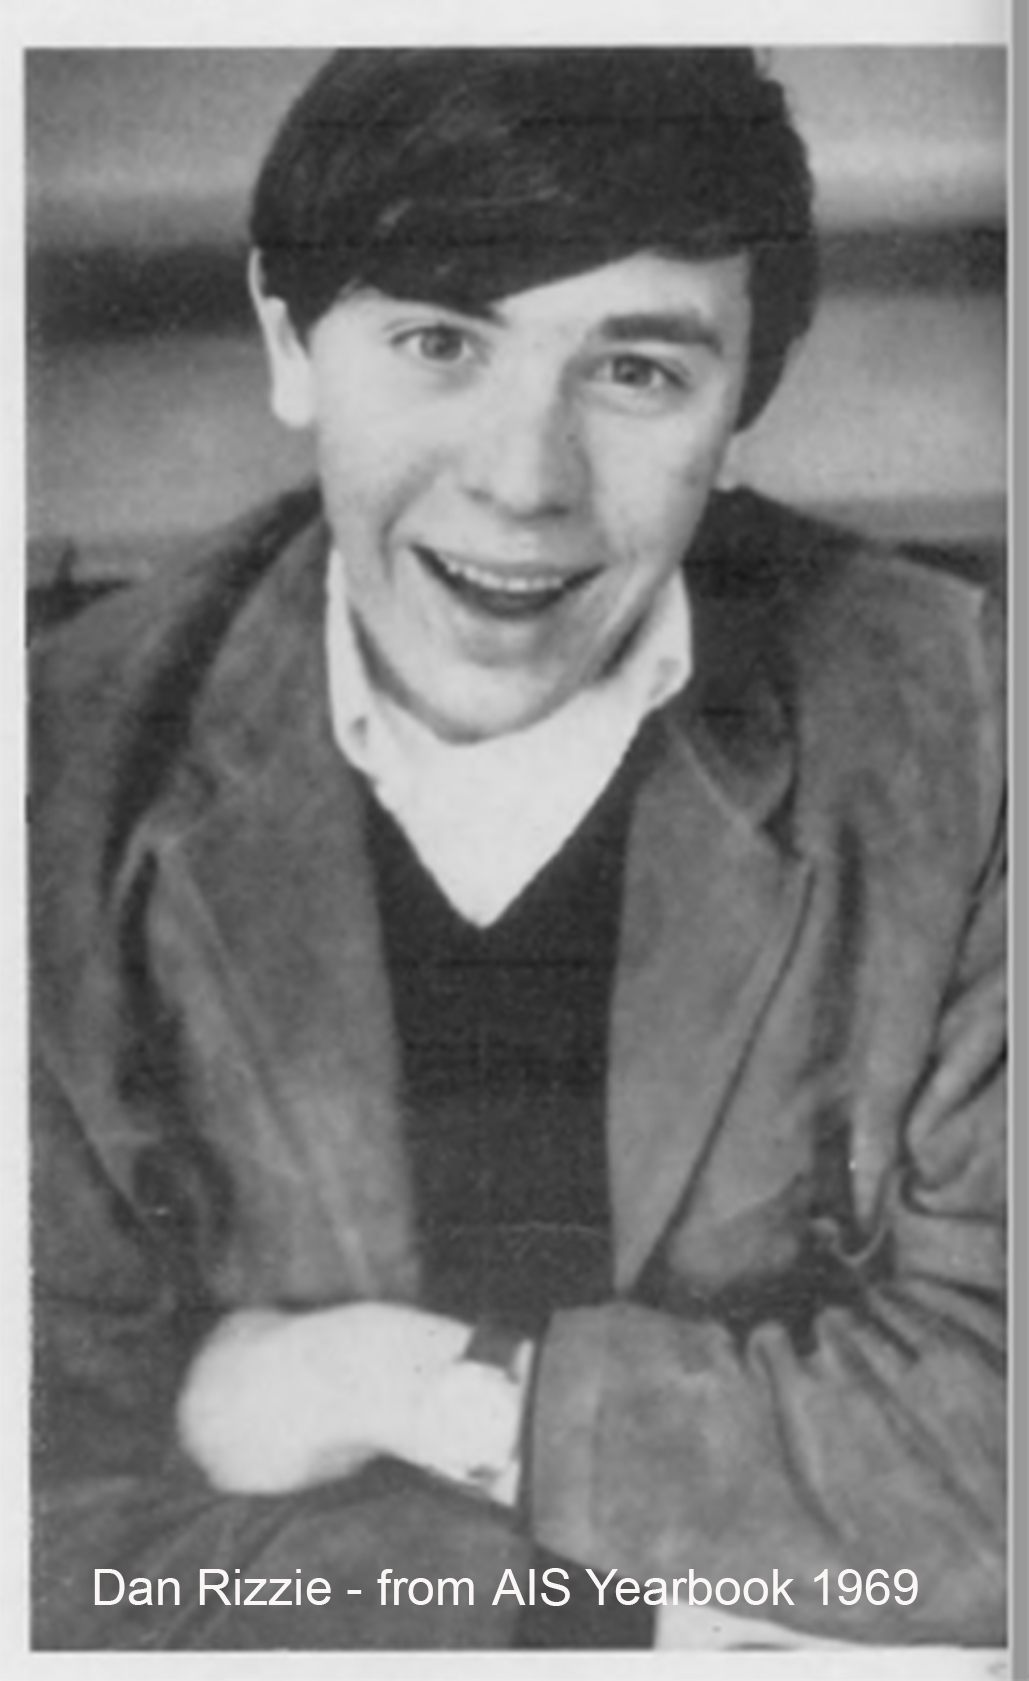 Dan Rizzie from 1969 AIS Yearbook